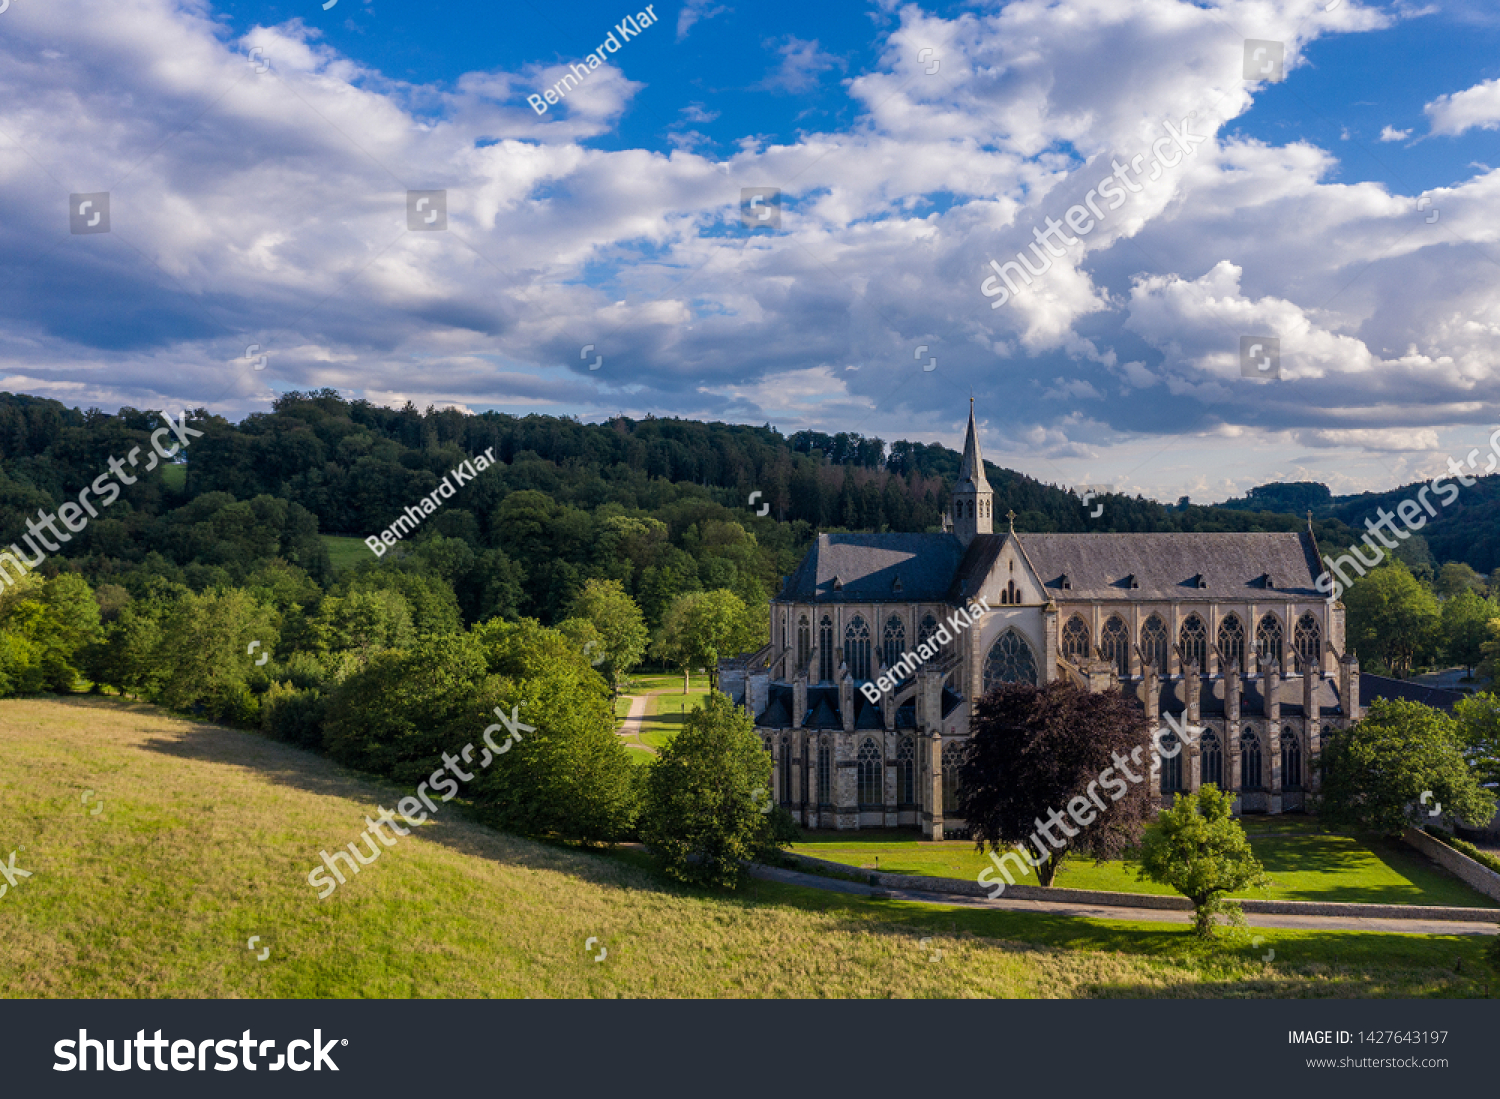 The Altenberg Cathedral from a bird's eye view #1427643197